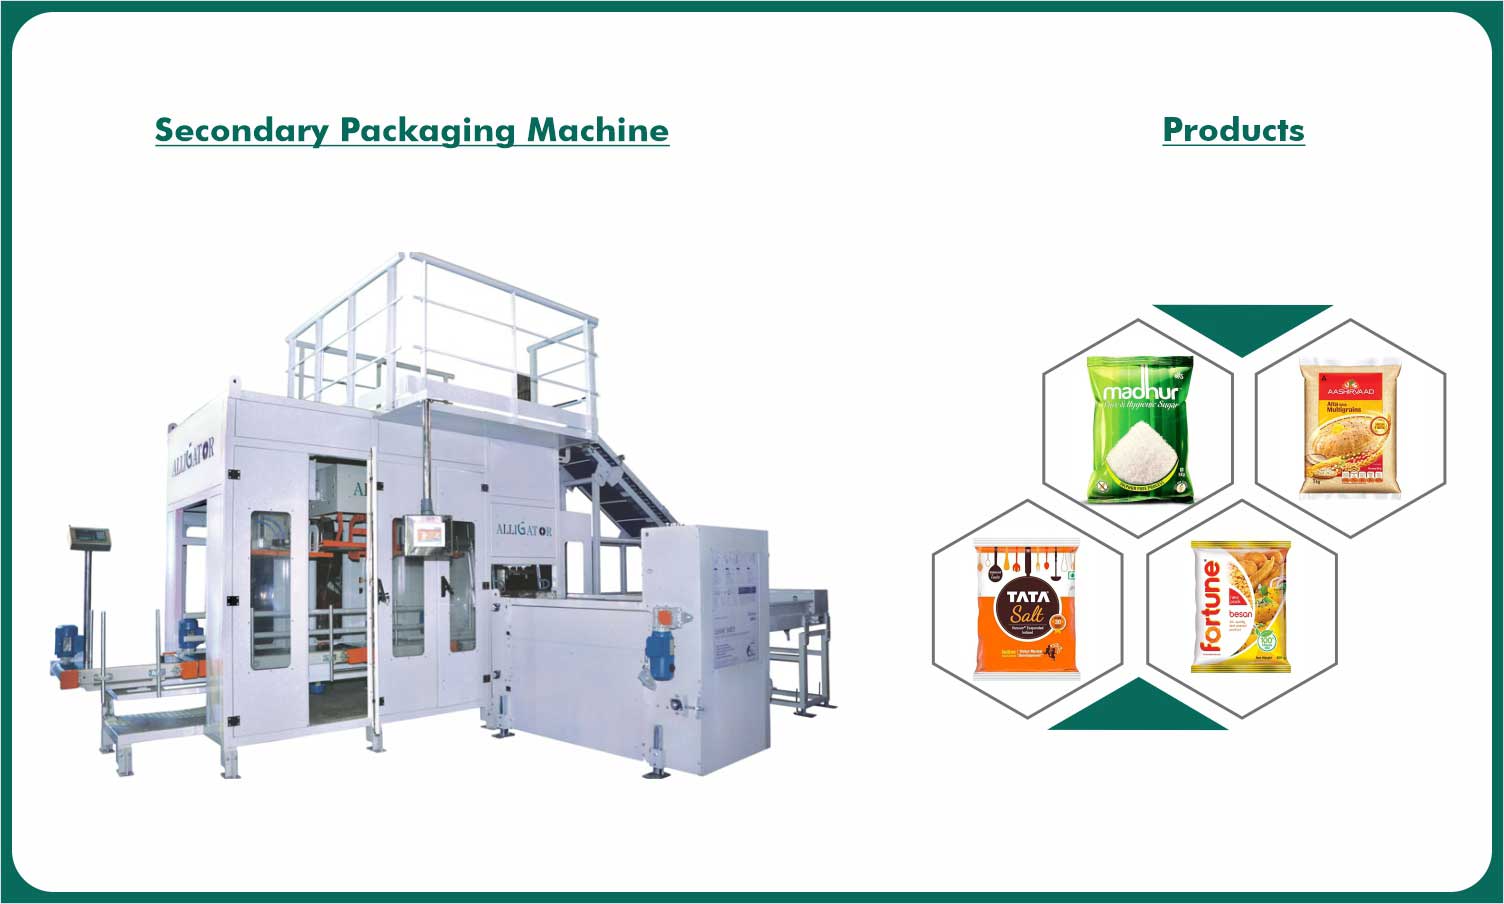 secondary-packaging-machine-automatic-pouch-packing-system-image